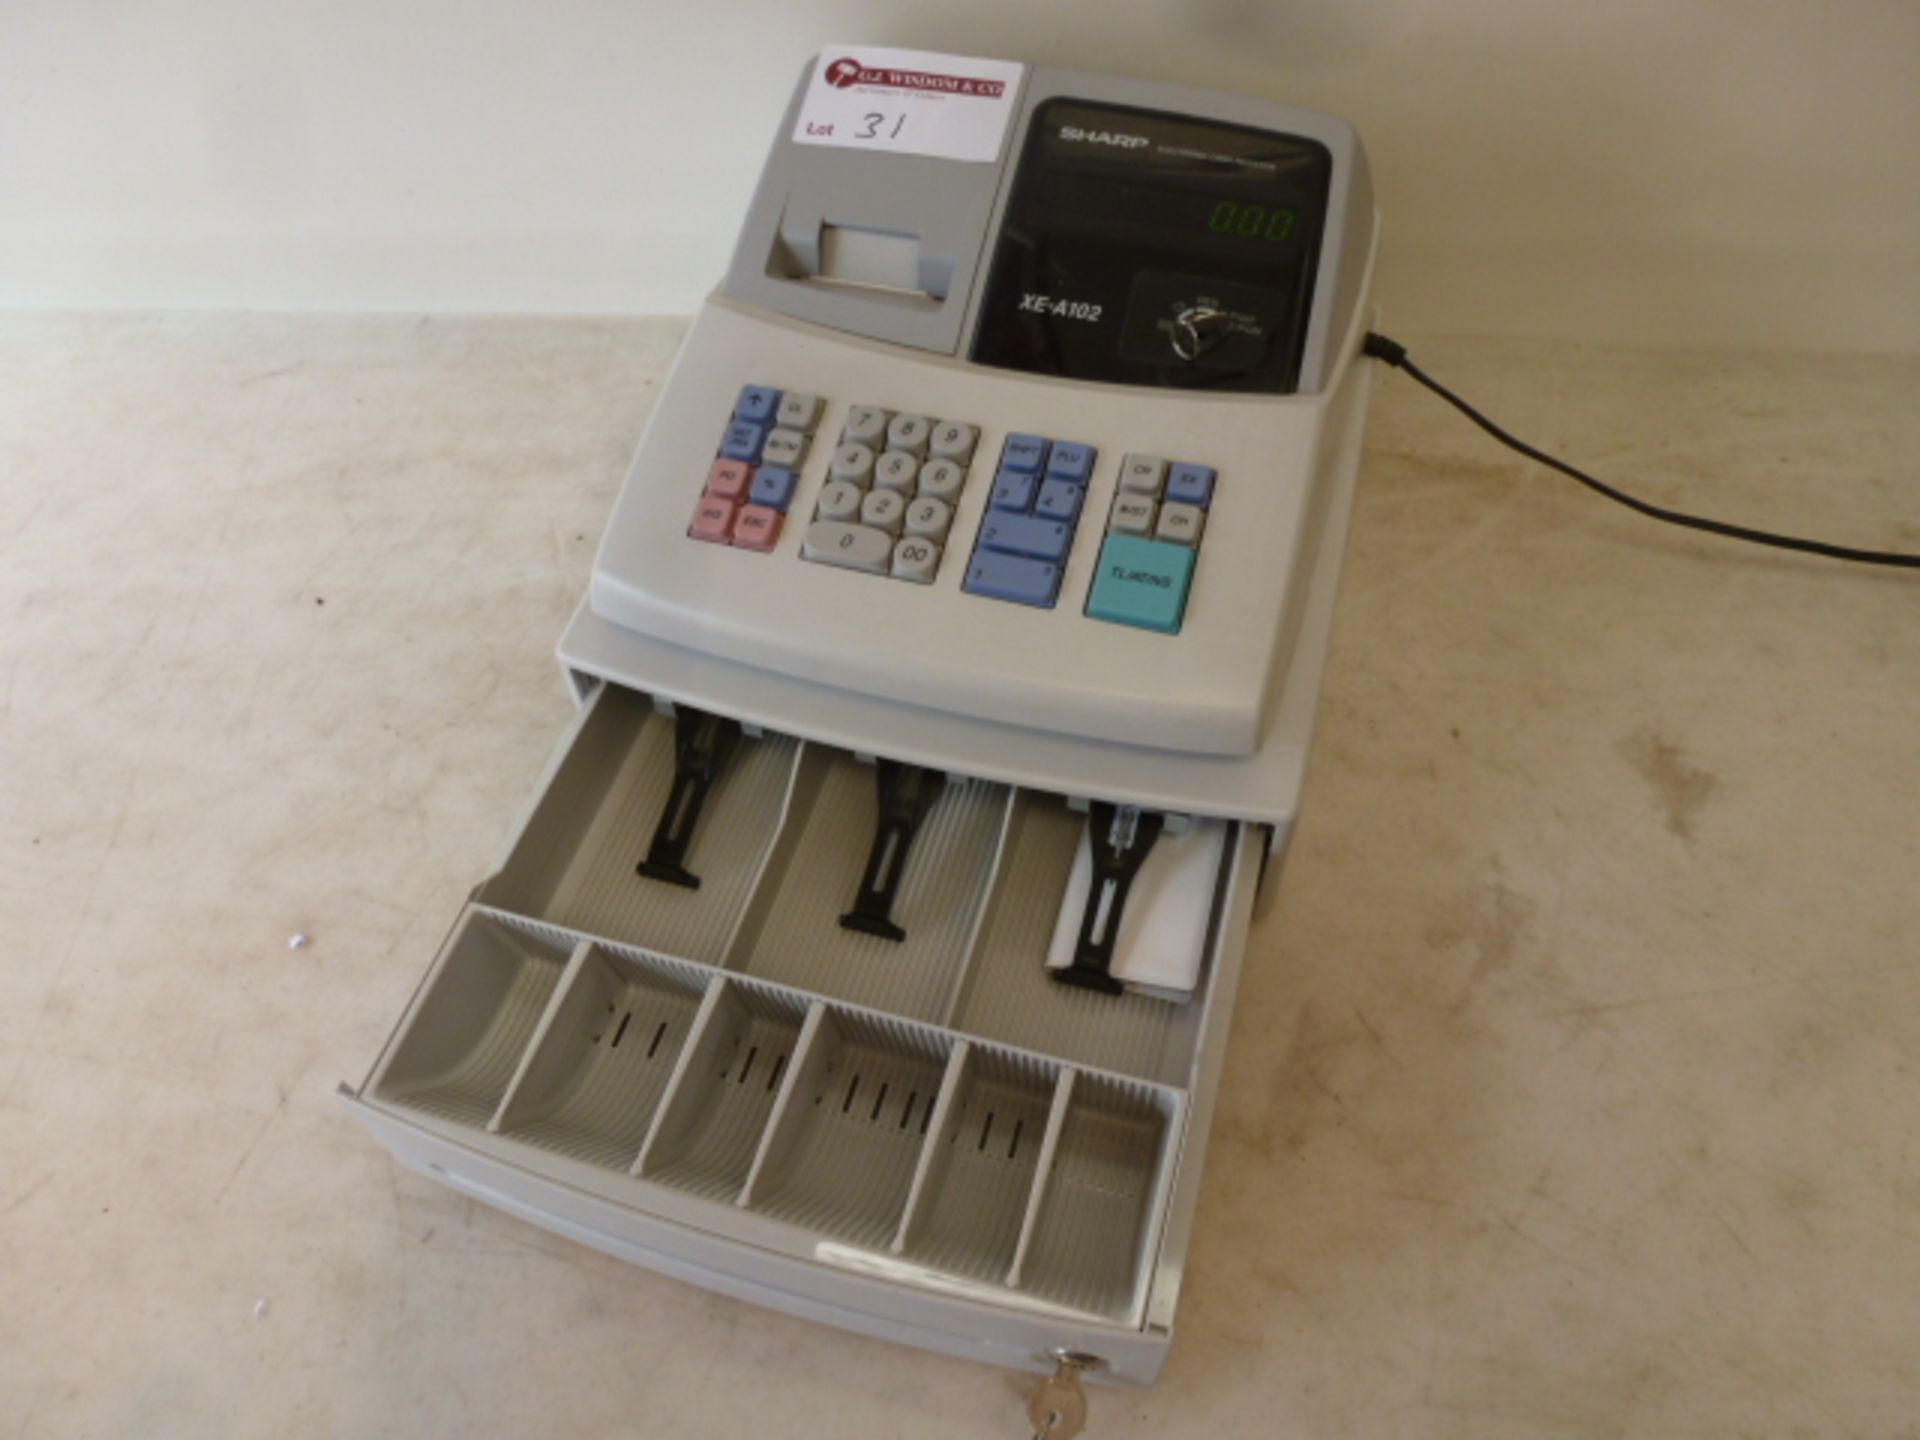 Sharp Electronic Cash Register, Model XE-A102, With Key & Cash Drawer Key - Image 2 of 4